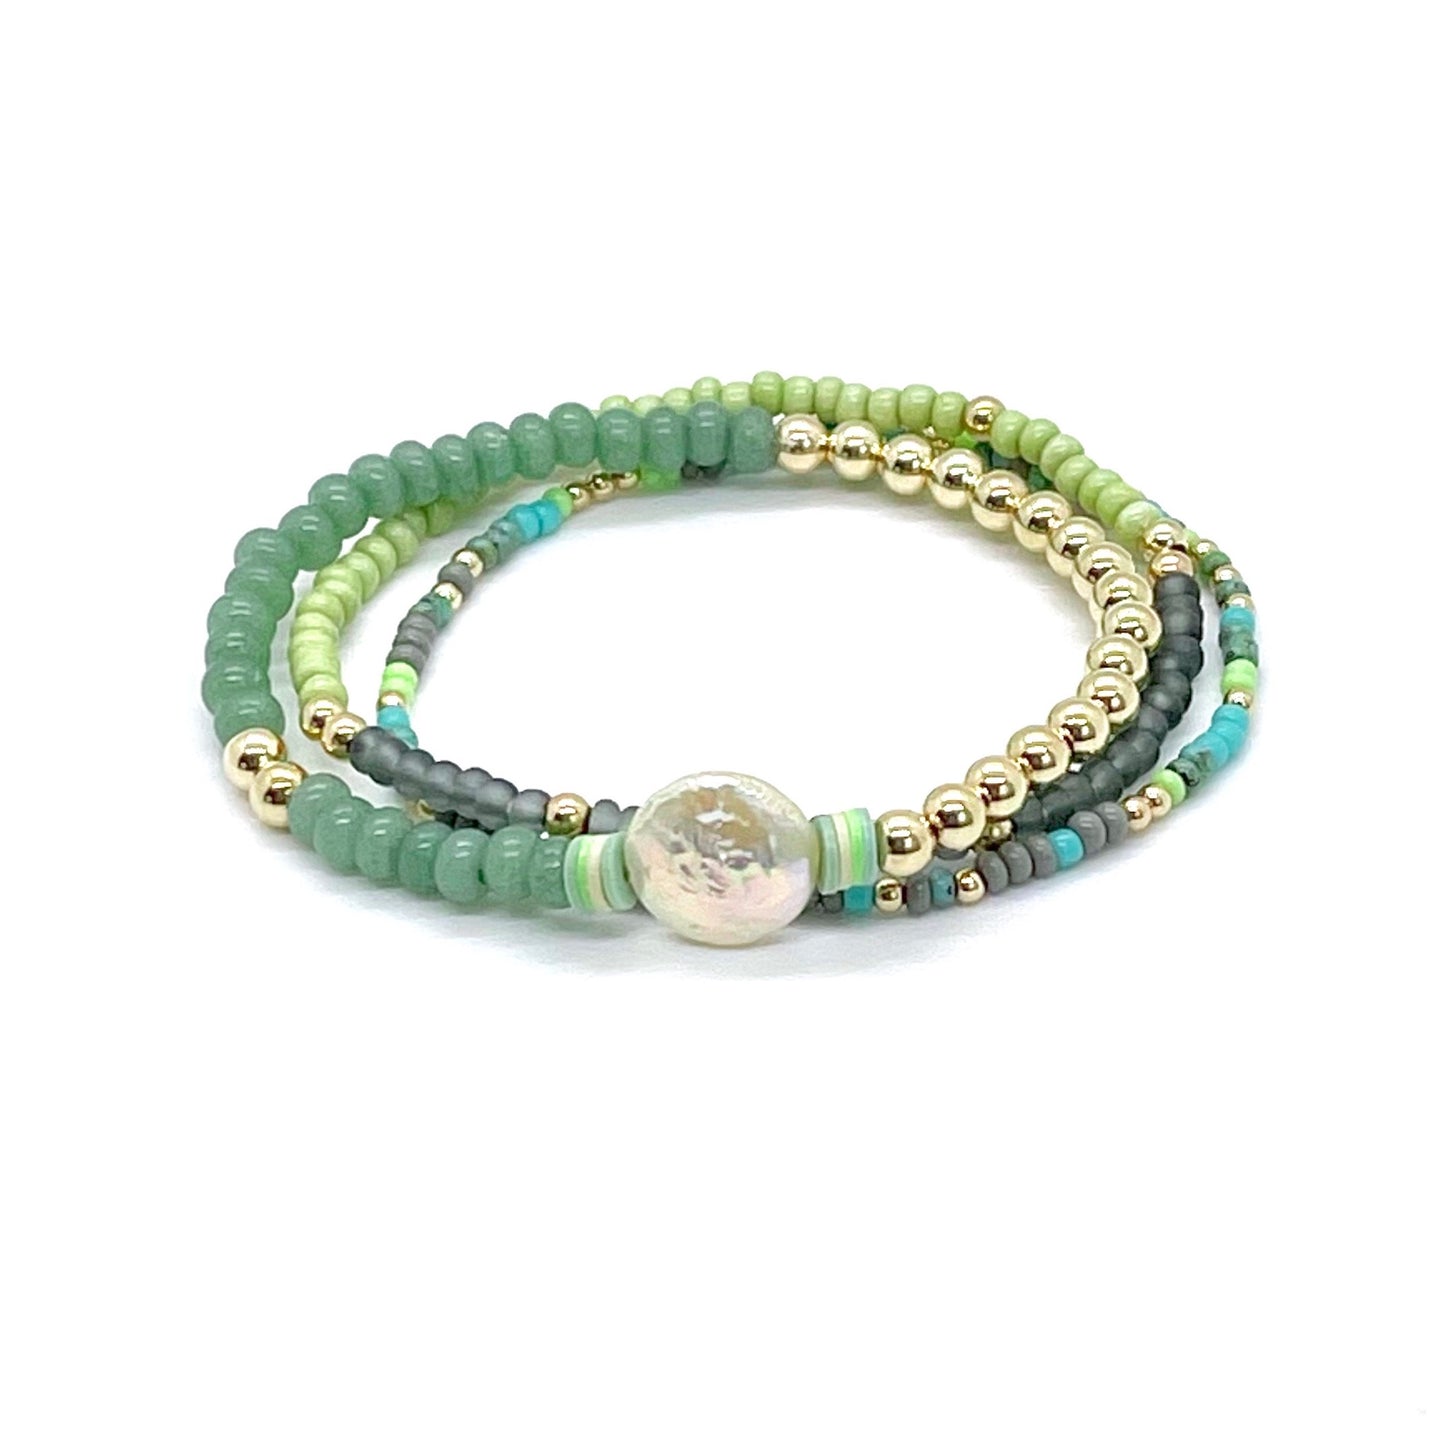 Flat freshwater coin pearl gold filled beaded stretch bracelet stack with jade, gray, and aqua glass seed and vinyl heishi beads.